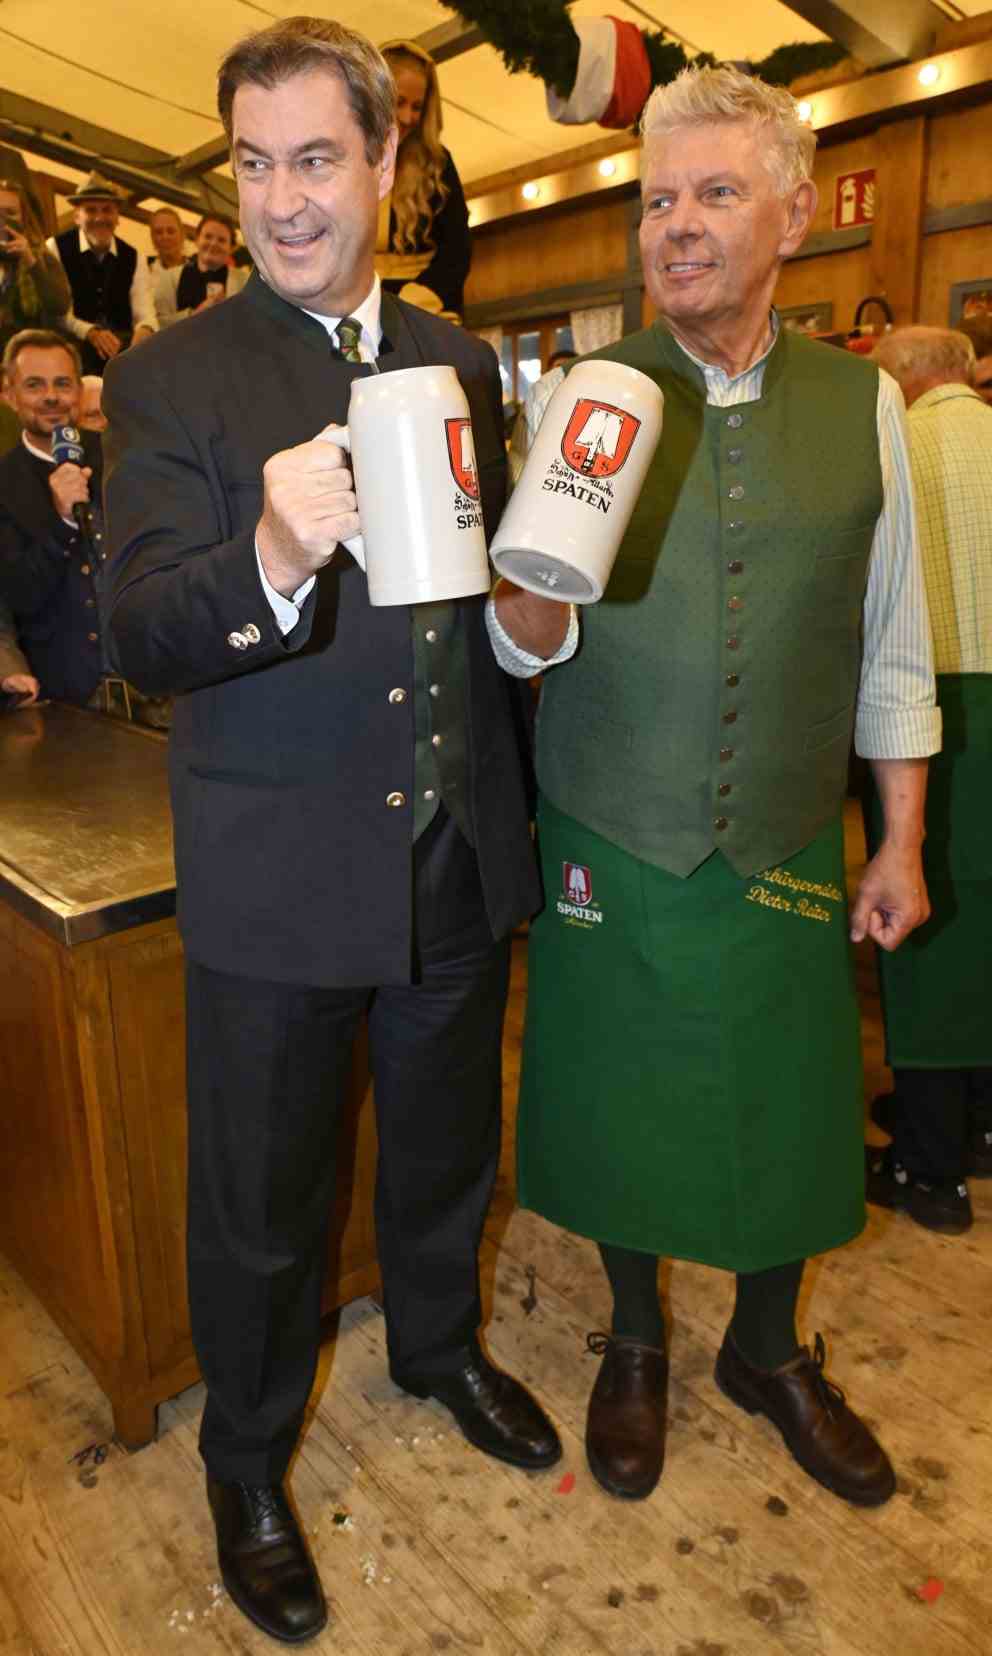 The beer certainly tasted great: Markus Söder on Saturday at the Wiesn tapping